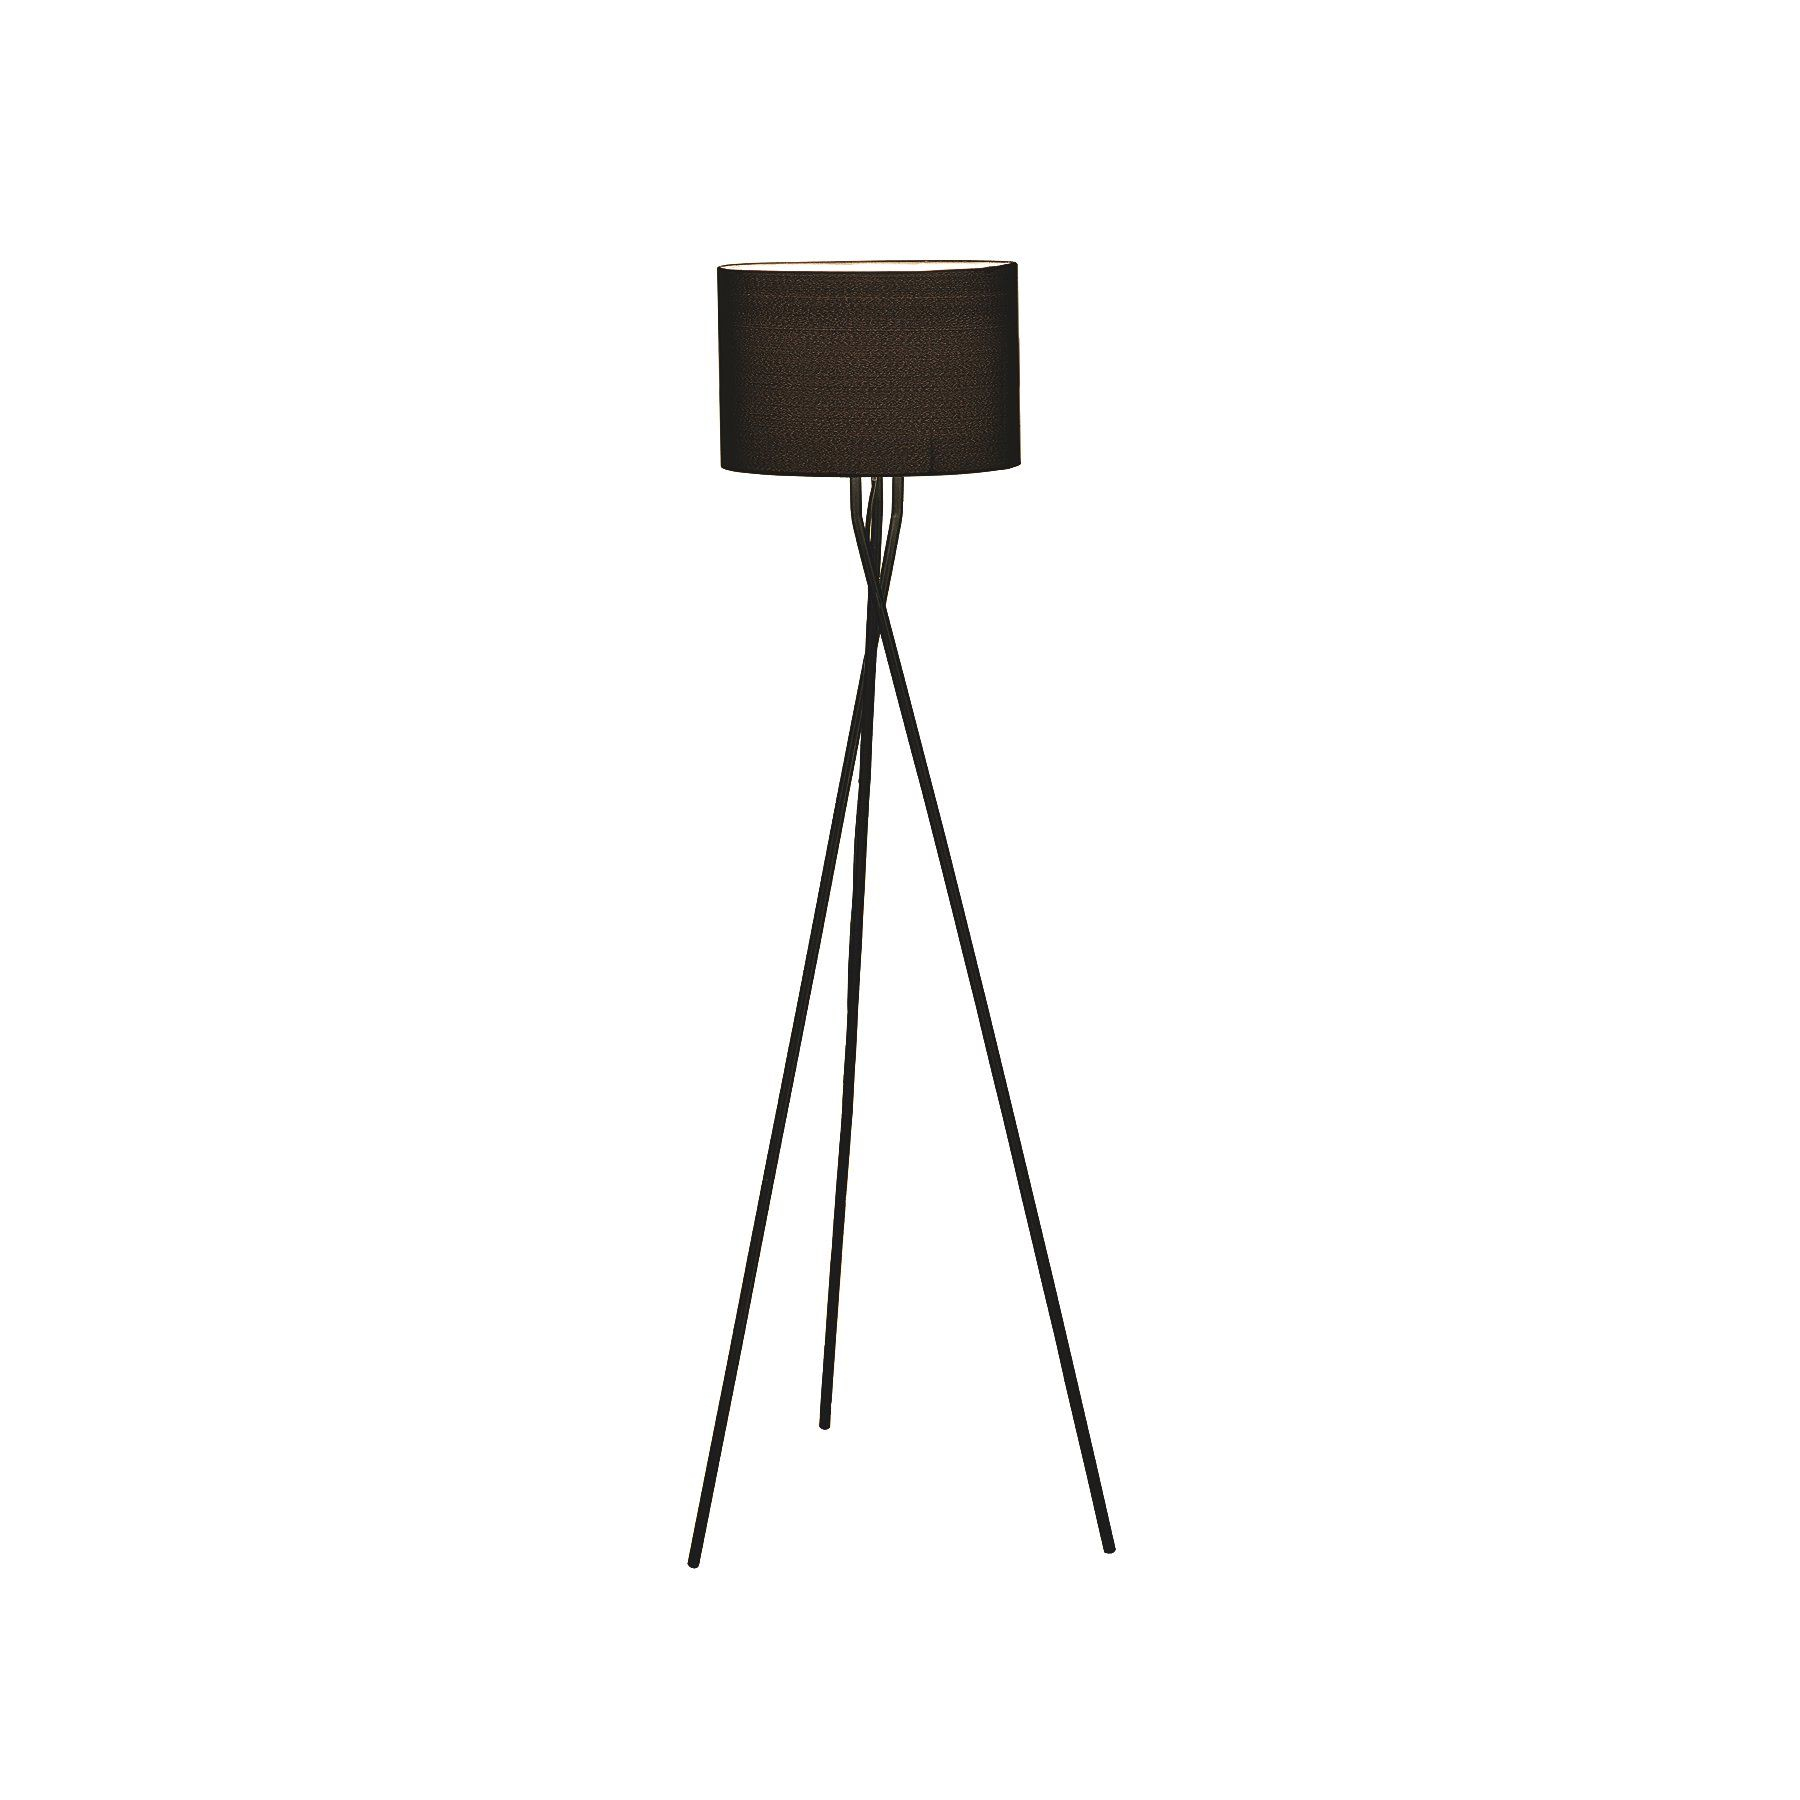 George Home Black Low Floor Lamp Home Garden George At intended for size 1800 X 1800